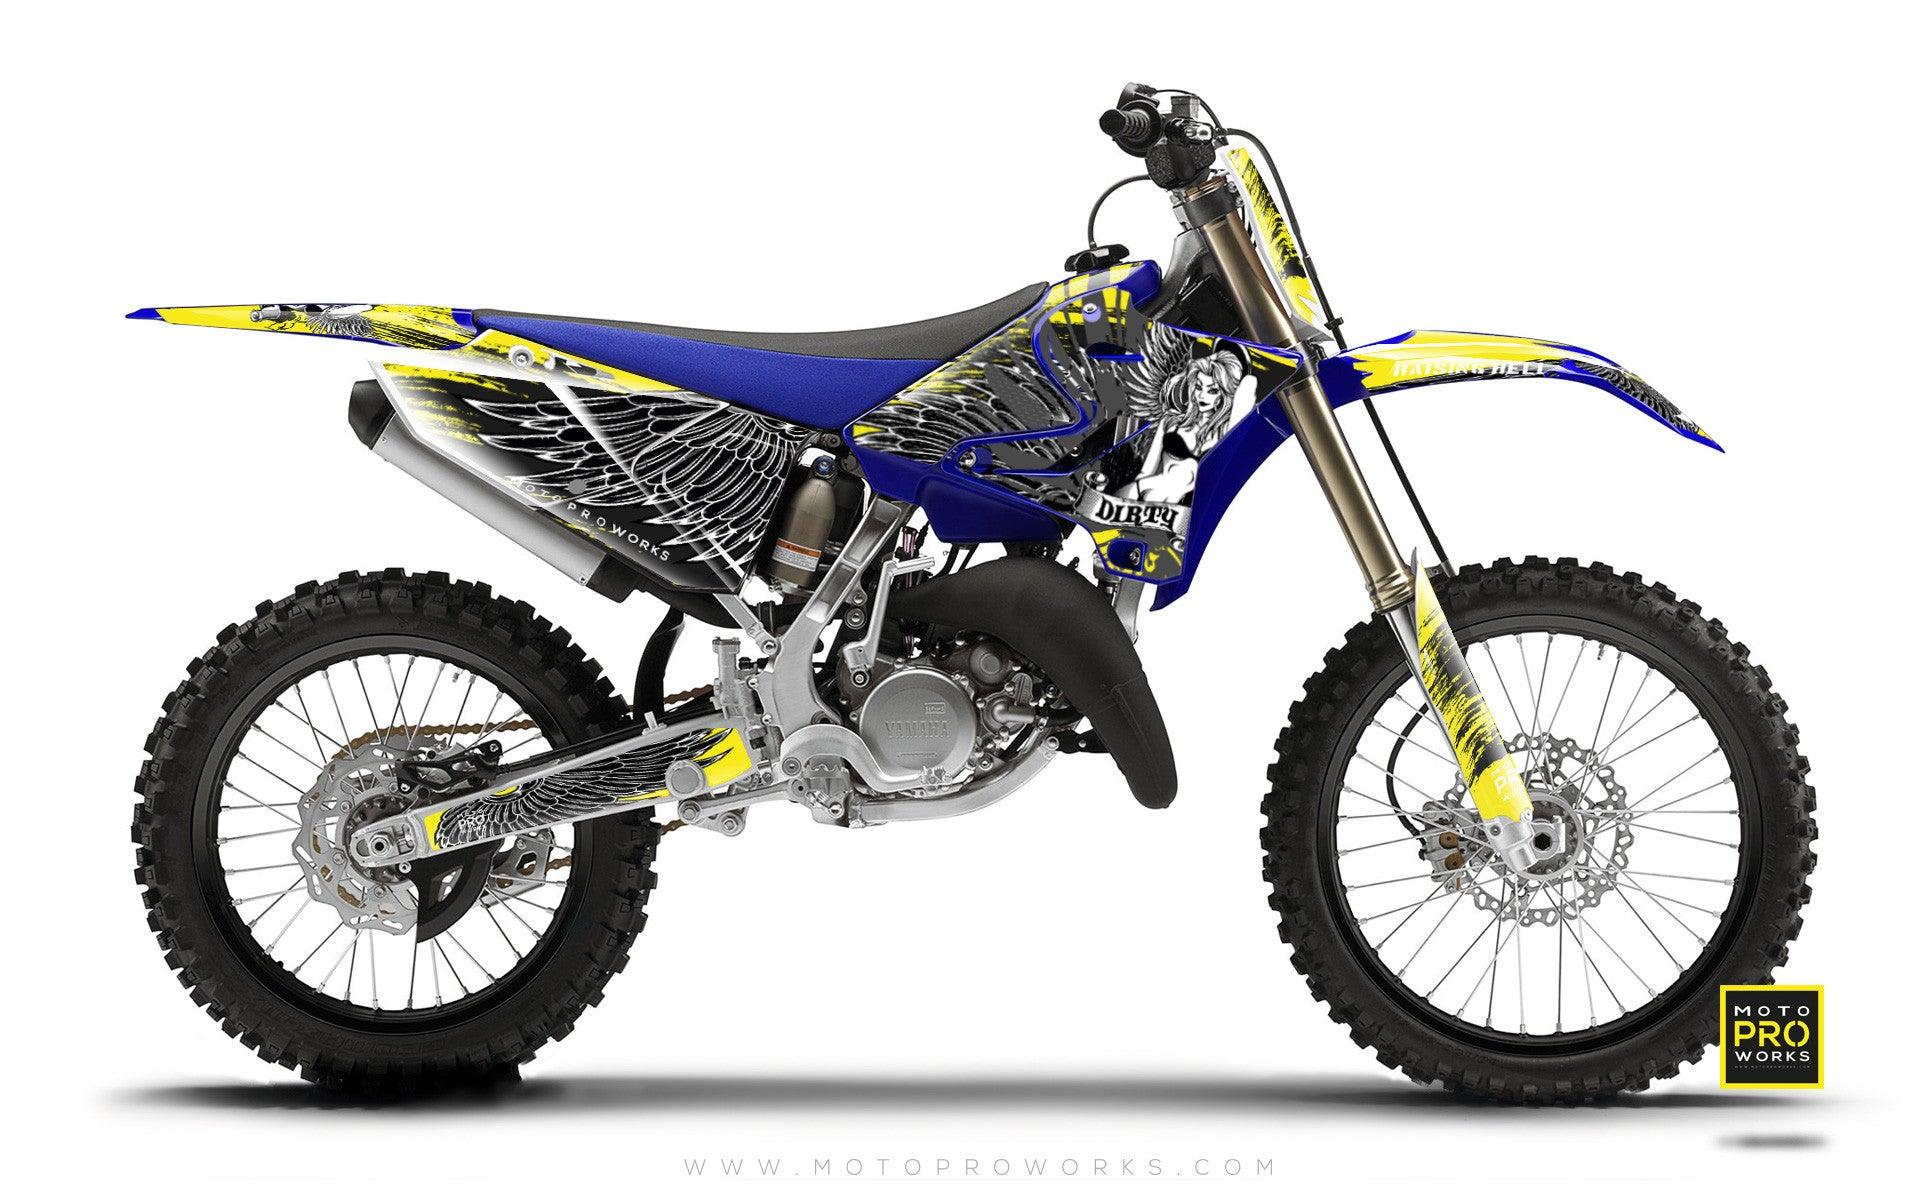 Yamaha GRAPHIC KIT - "Dirty Angel" (yellow) - MotoProWorks | Decals and Bike Graphic kit